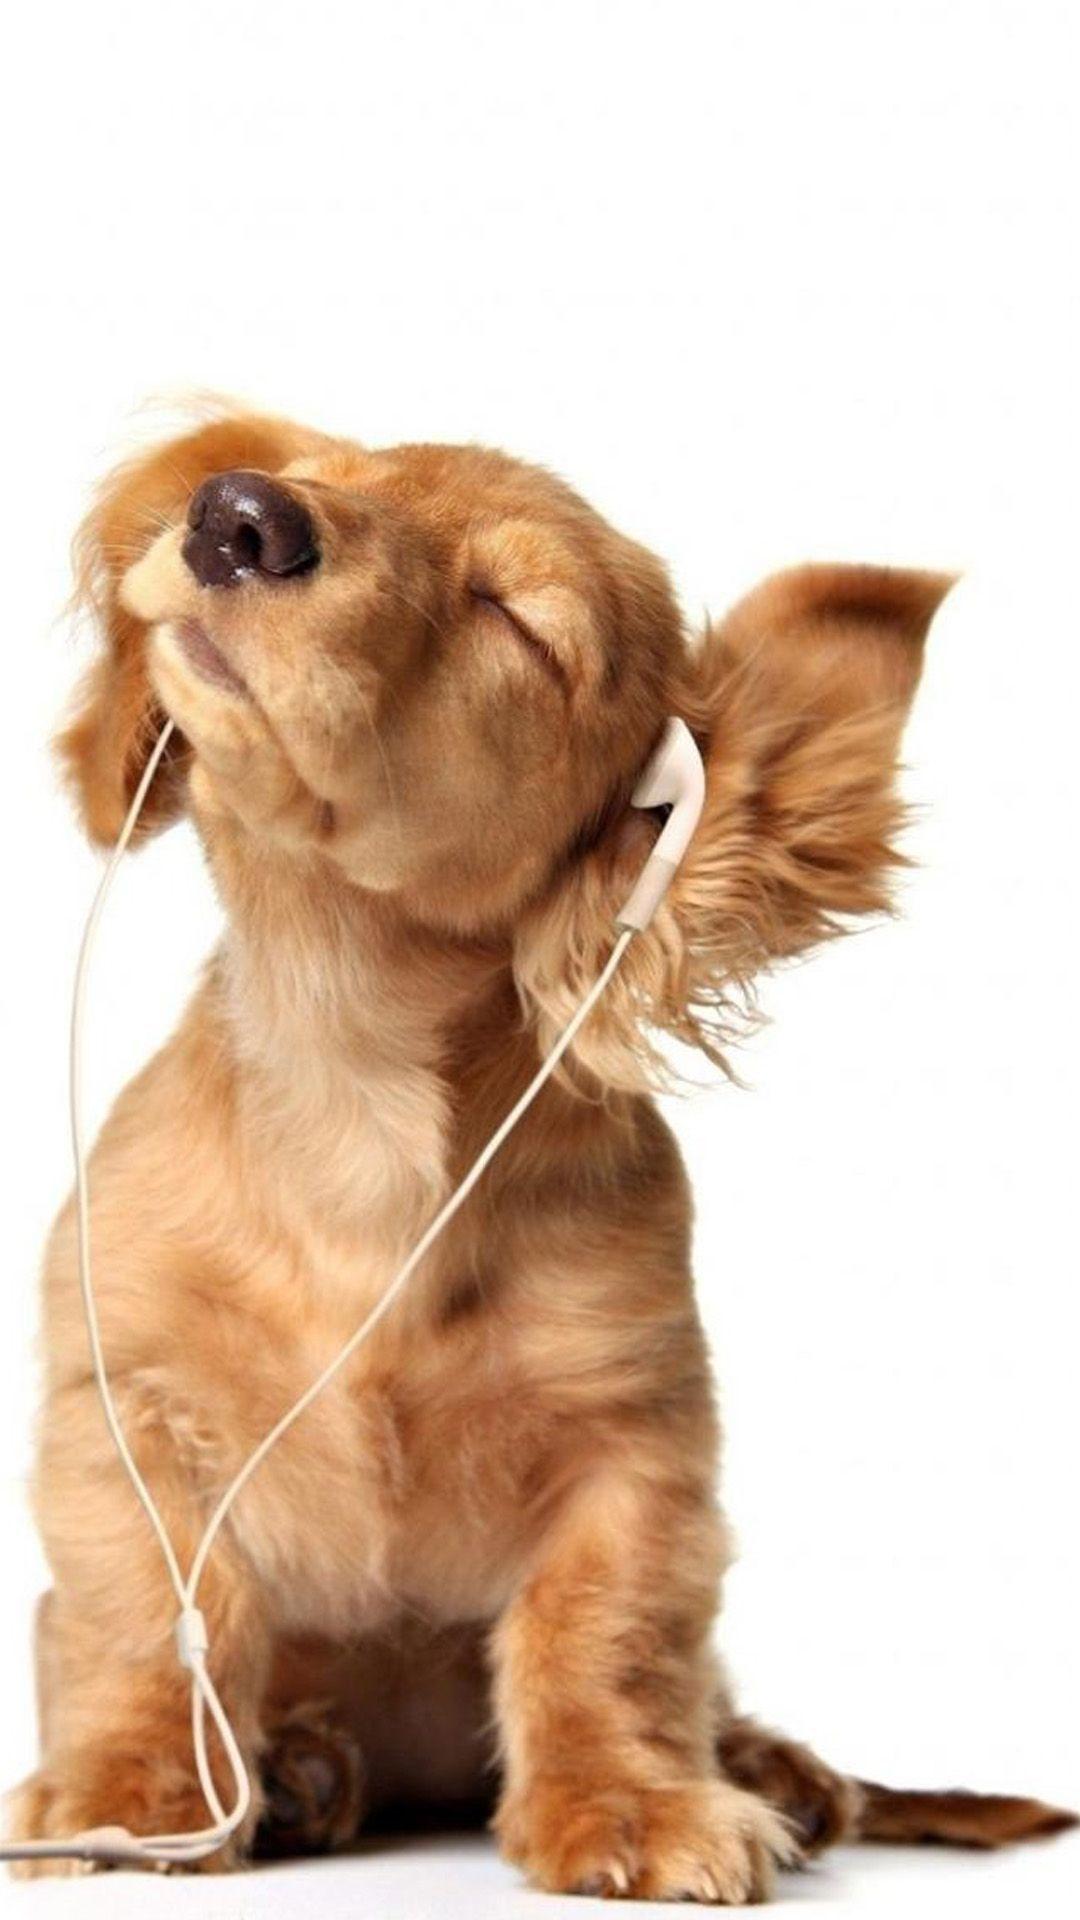 Intoxicated Listen To Music Cute Puppy IPhone 6 Wallpaper Download. IPhone Wallpaper, IPad Wallpaper One Stop Download. Puppies, Pets, Cute Animals